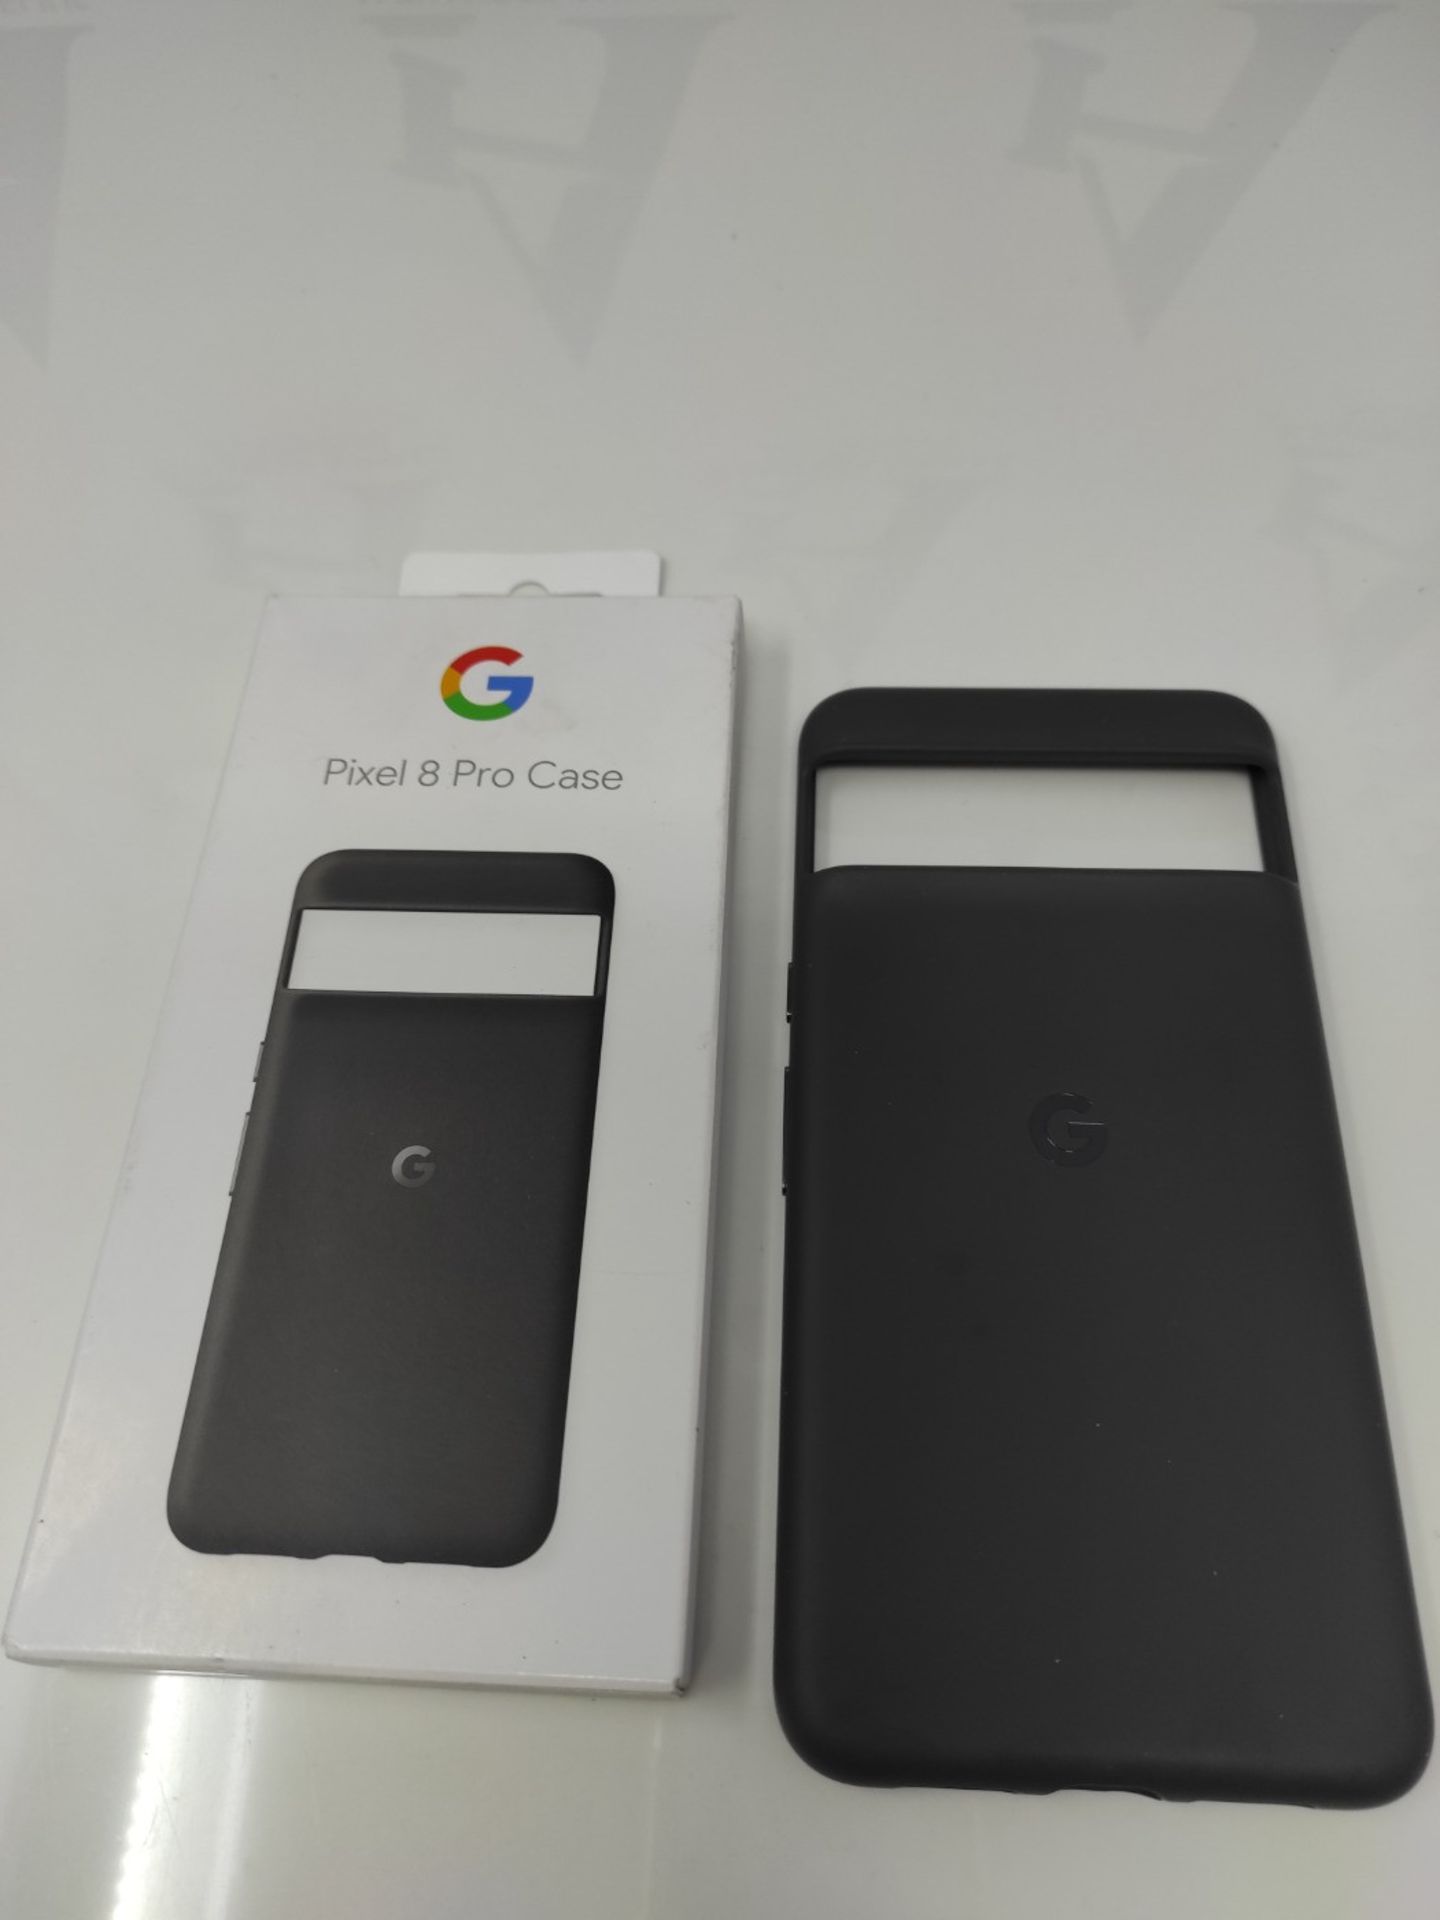 Google Pixel 8 Pro Case - Durable Protection - Stain-Resistant Silicone - Android Phon - Image 2 of 3